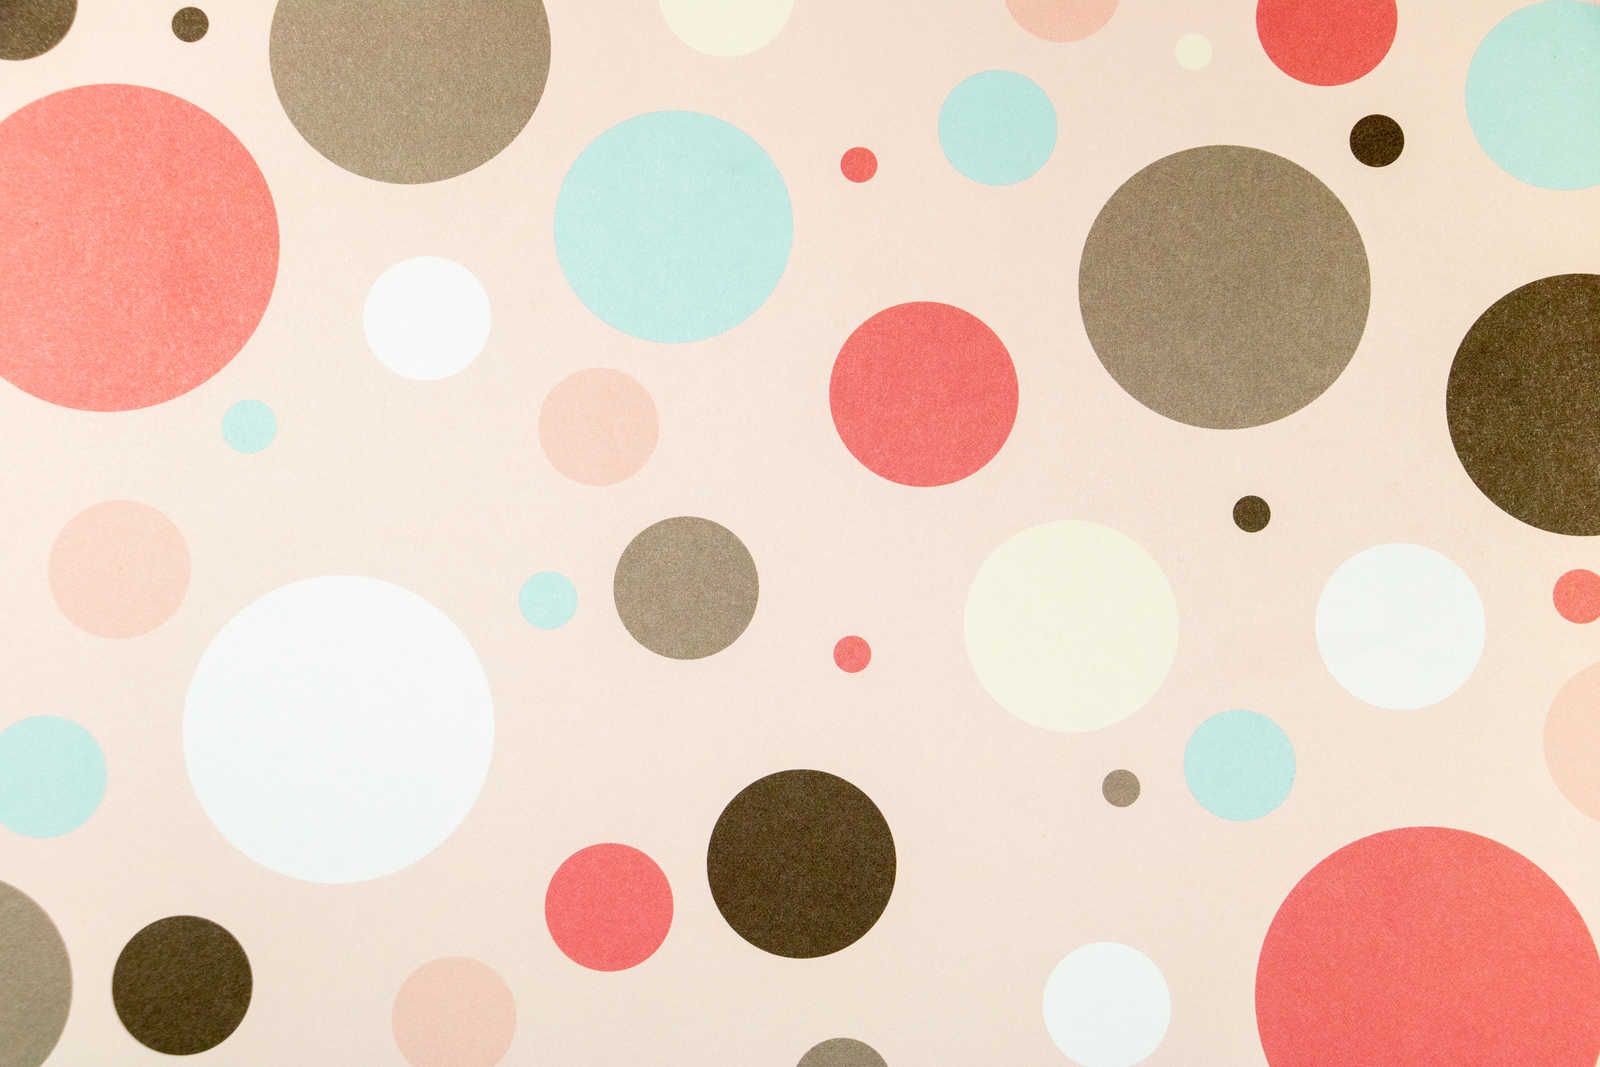             Canvas for children's room with colourful circles - 120 cm x 80 cm
        